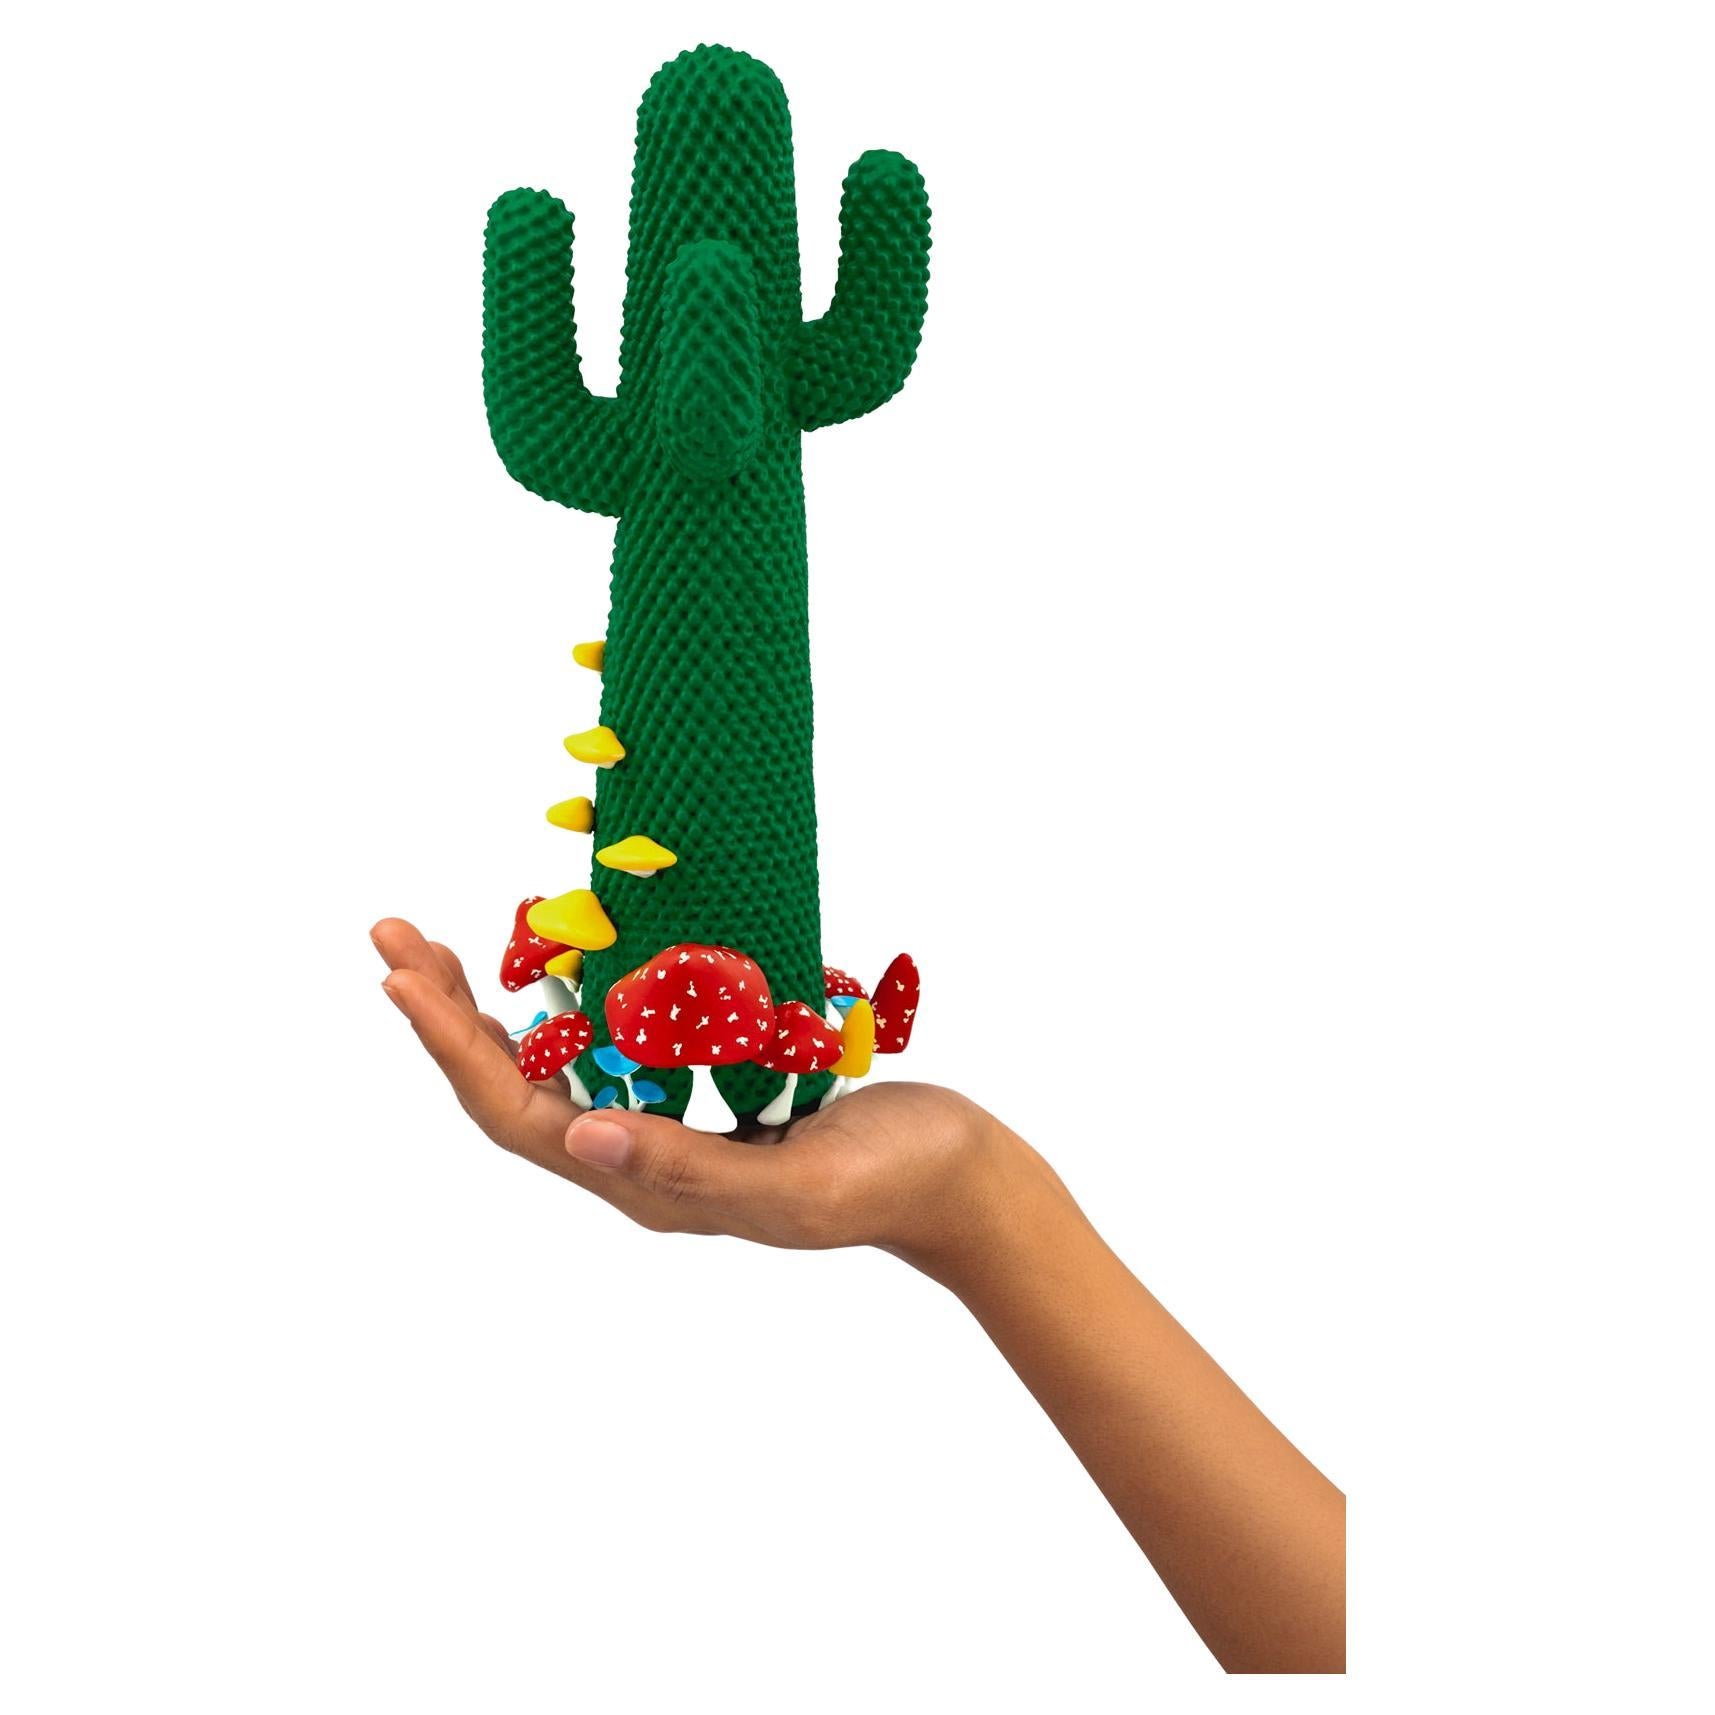 Limited Edition #84/99

Gufram presents the miniaturised version of the Shroom CACTUS® created in collaboration with A$AP Rocky and the artist’s new design studio HOMMEMADE Exactly as the real-size Shroom CACTUS®, the new Guframini piece features